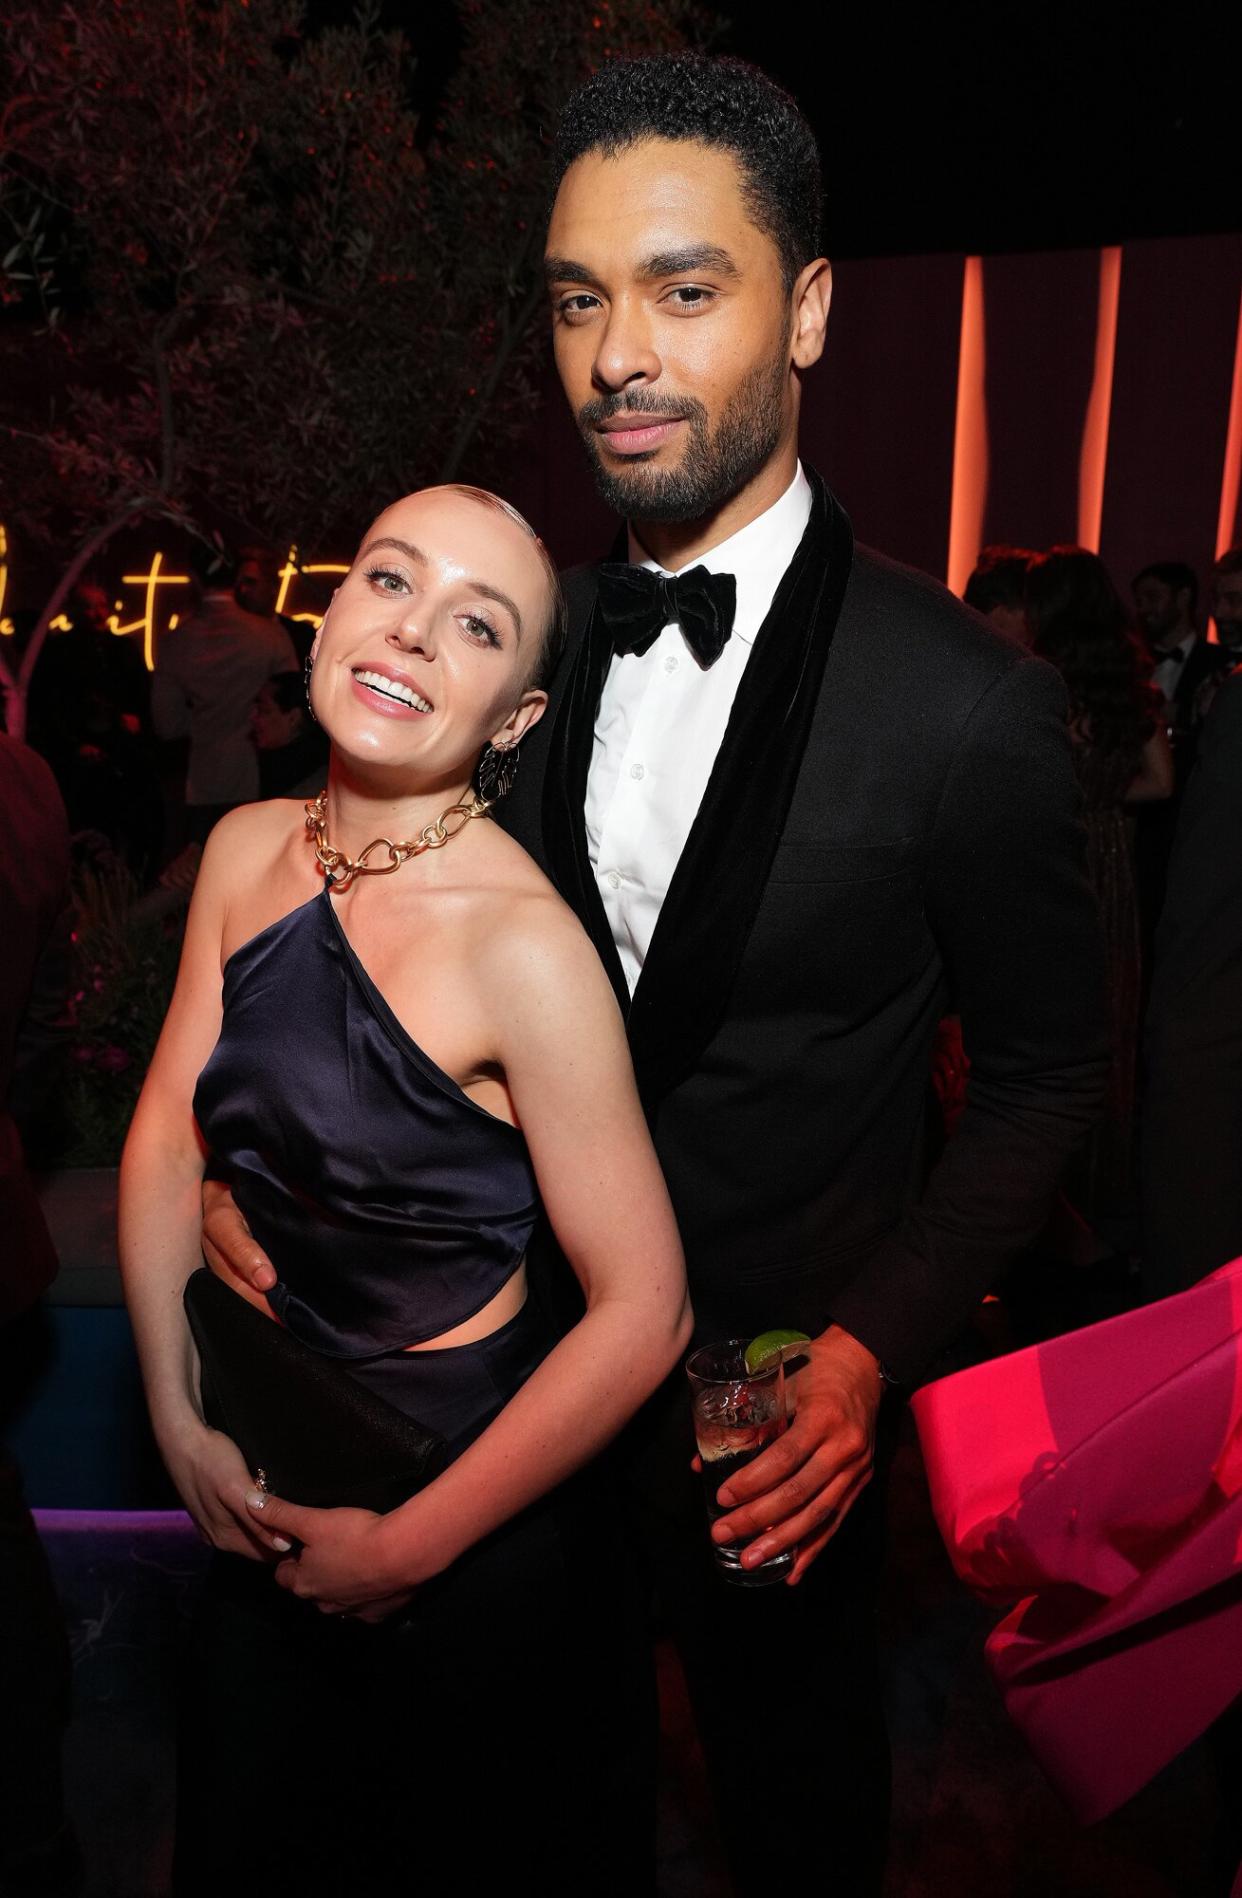 Emily Brown and Regé-Jean Page attend the 2022 Vanity Fair Oscar Party hosted by Radhika Jones at Wallis Annenberg Center for the Performing Arts on March 27, 2022 in Beverly Hills, California.